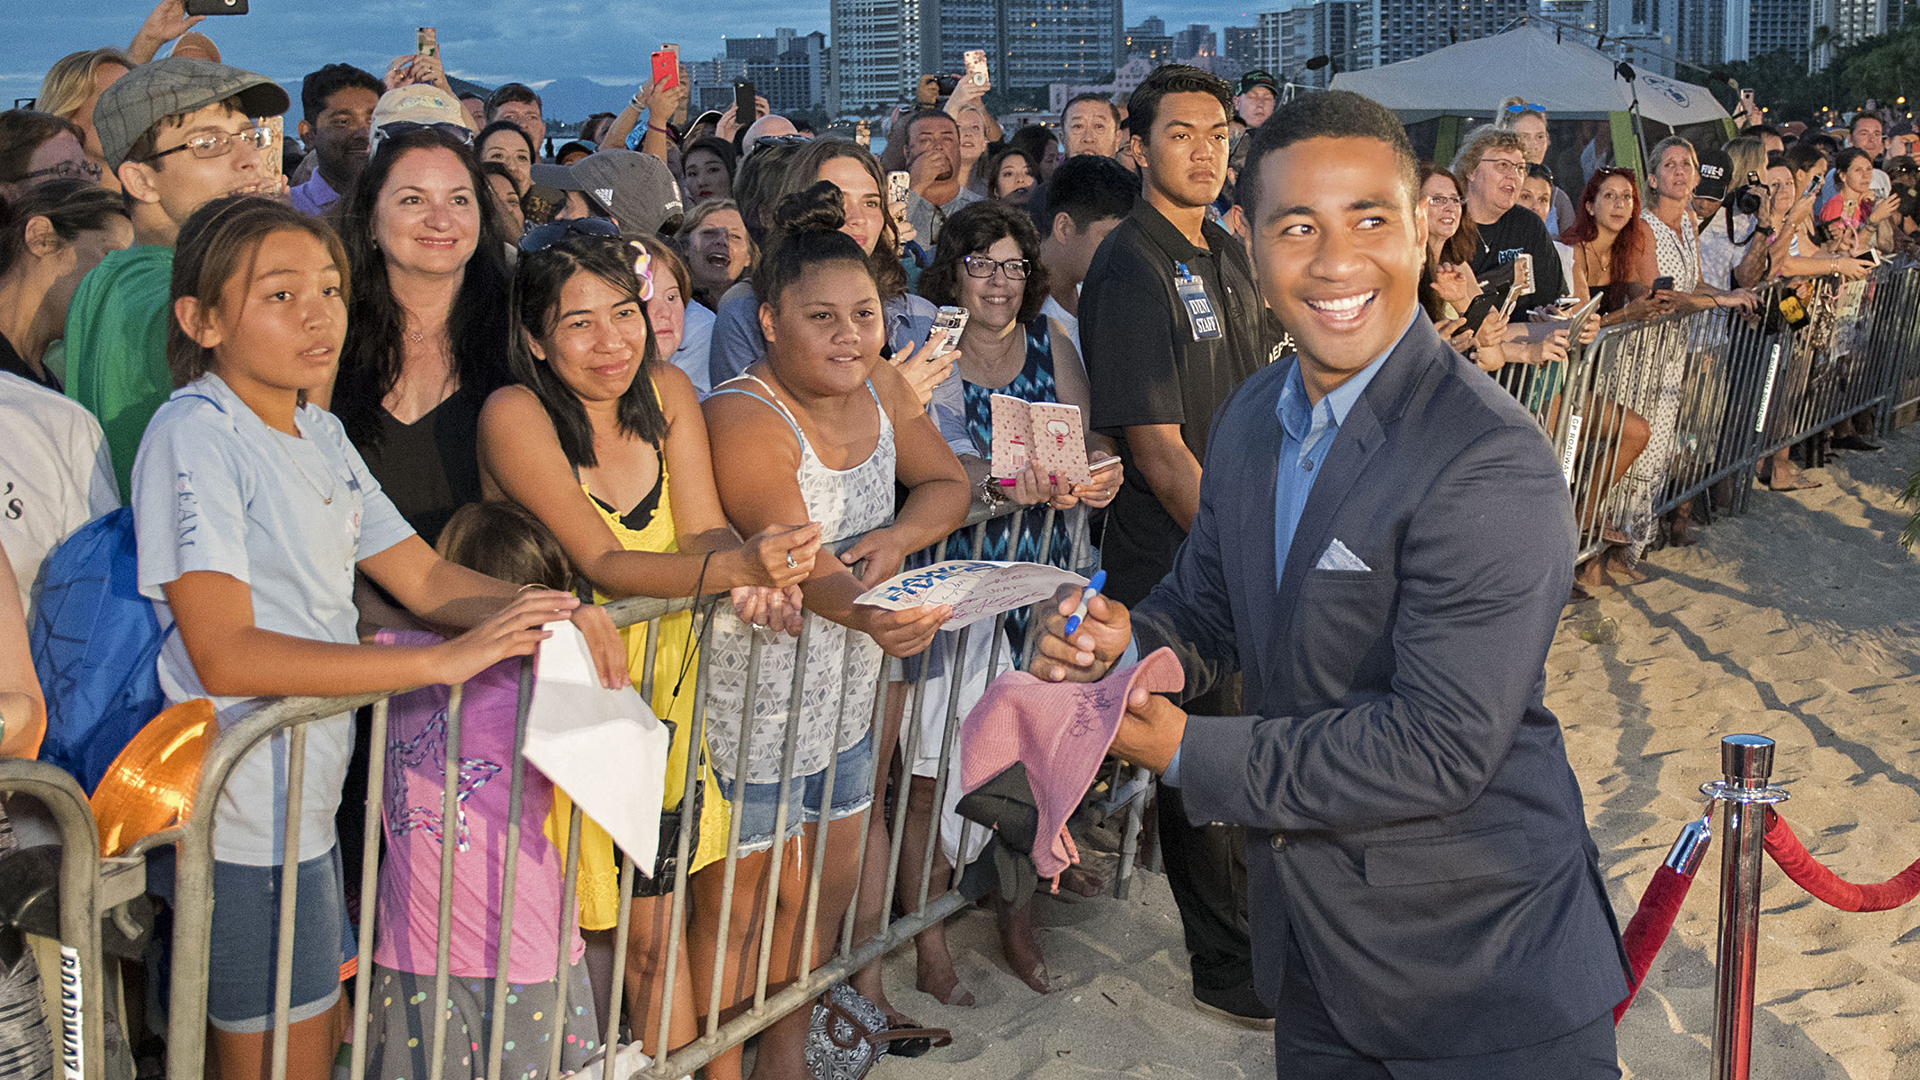 Beulah Koale turns to smile as he signs autographs for fans on the red carpet.